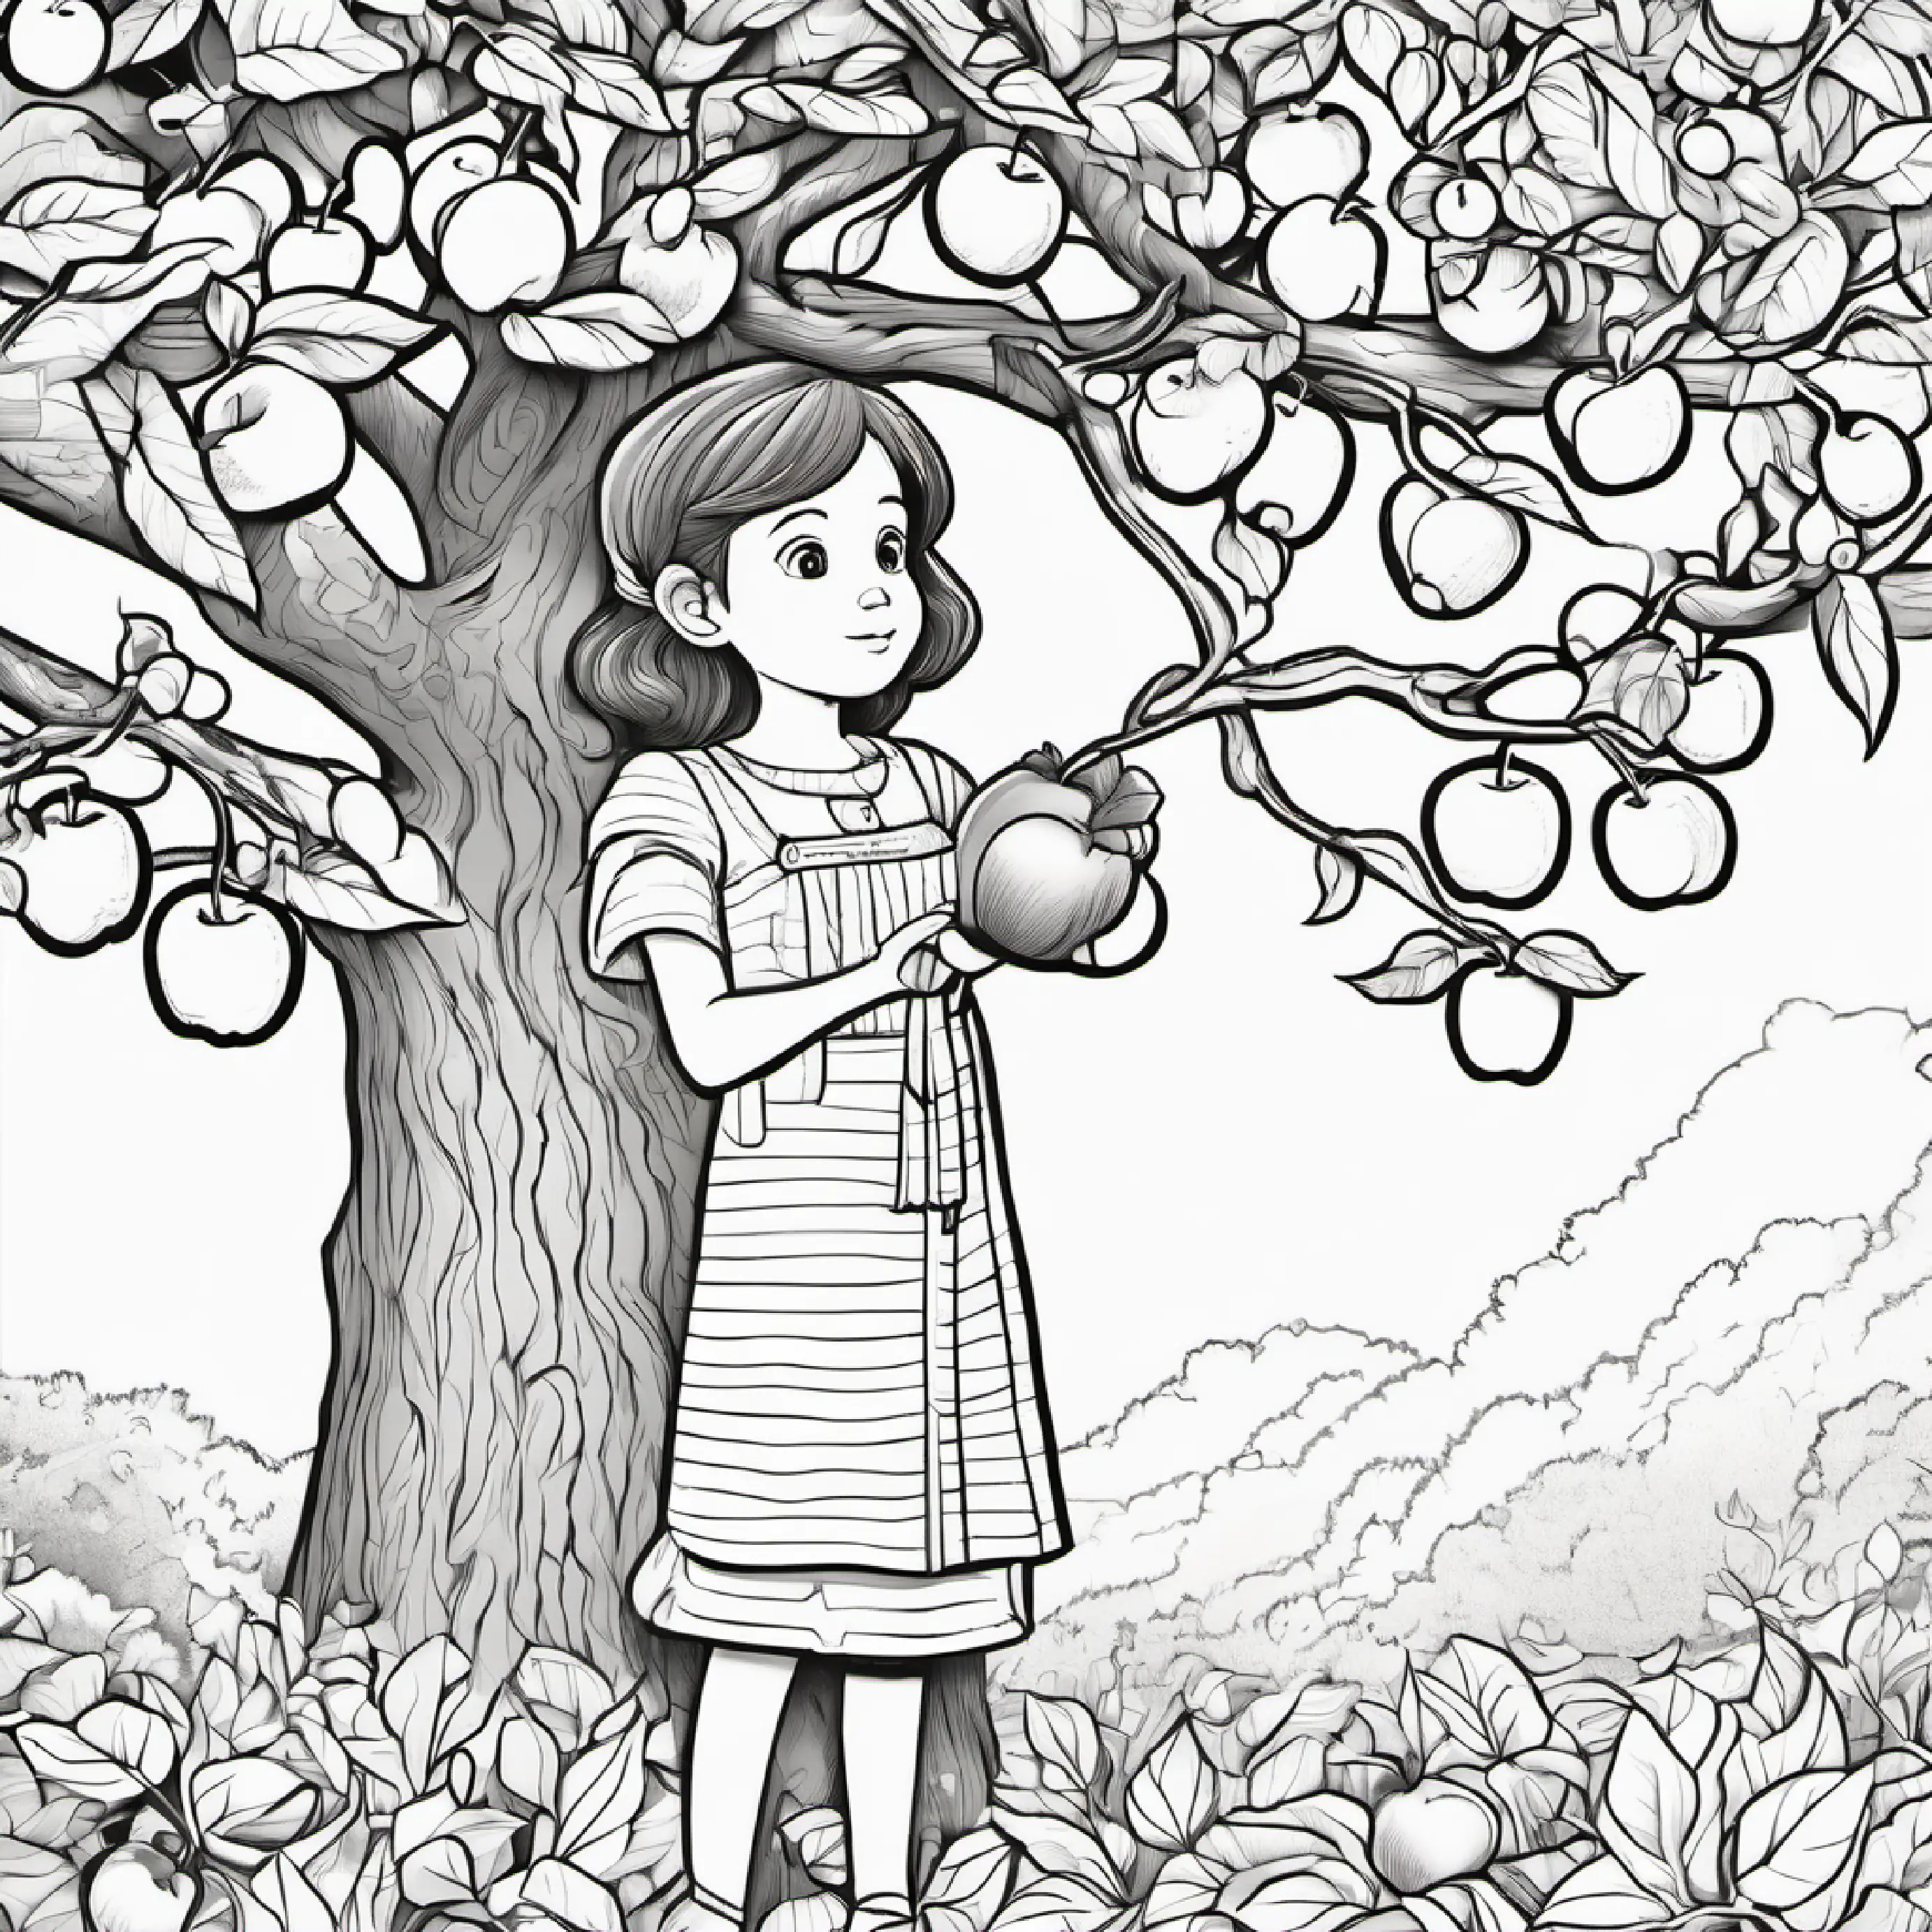 Young girl with brown hair and bright blue eyes starts counting apples on the tree.